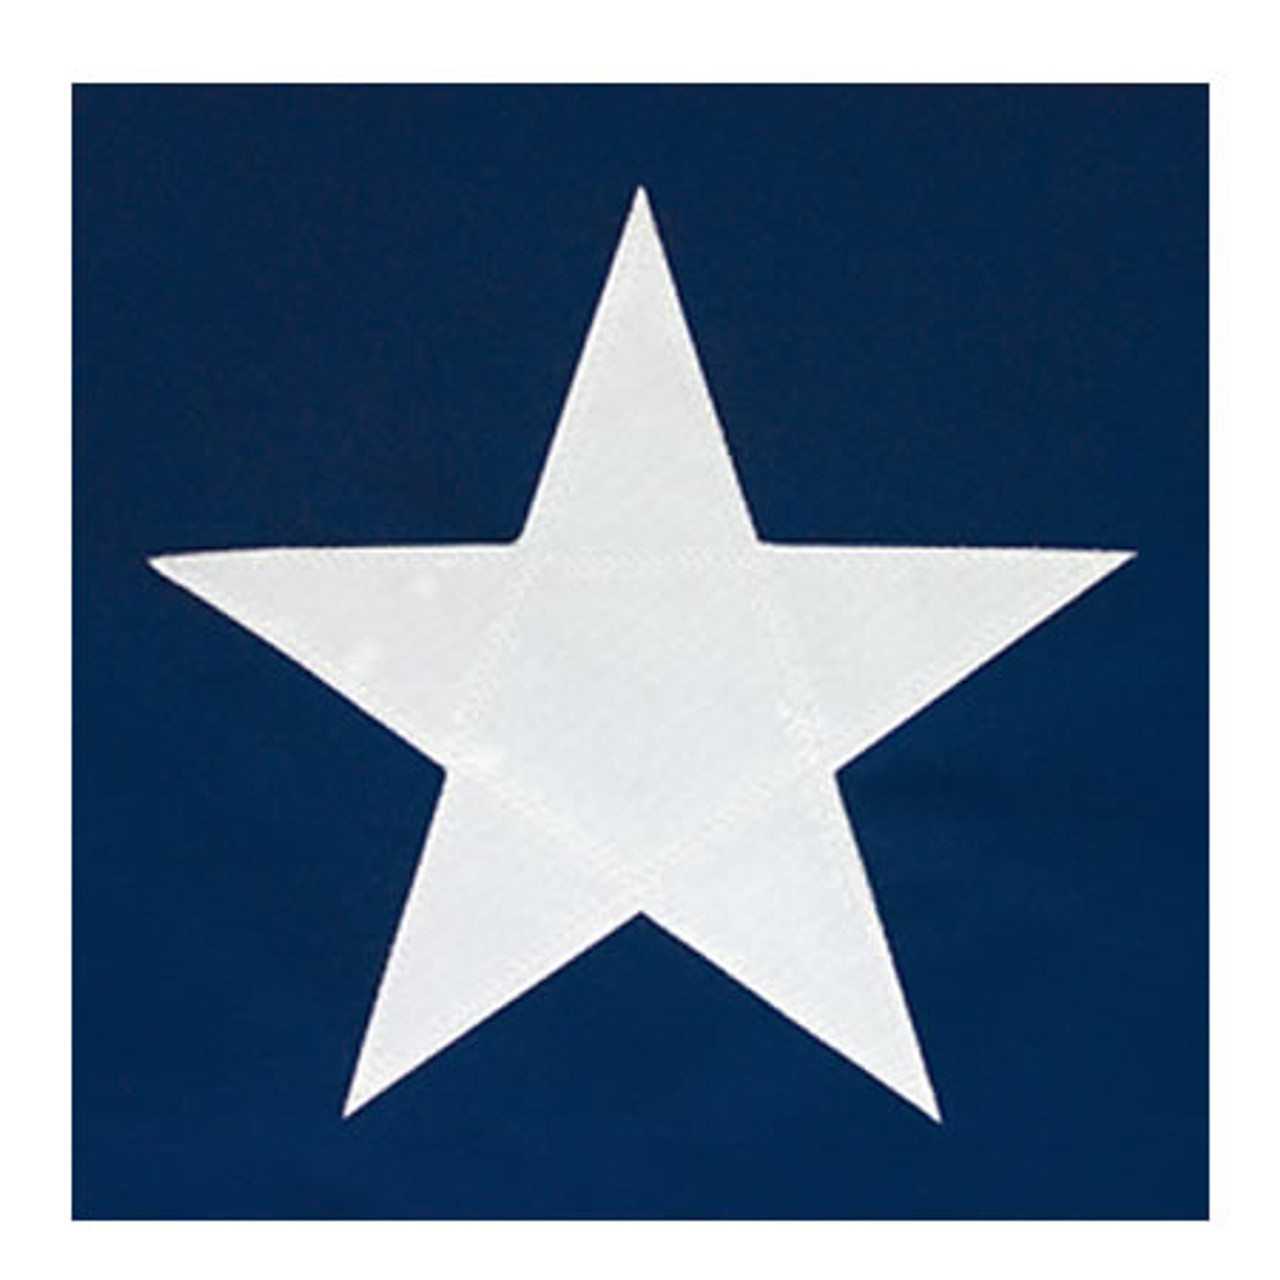 Details about   2X3 TEXAS STATE FLAG TX TEXAN LONE STAR 2'X3'-FREE SHIPPING 